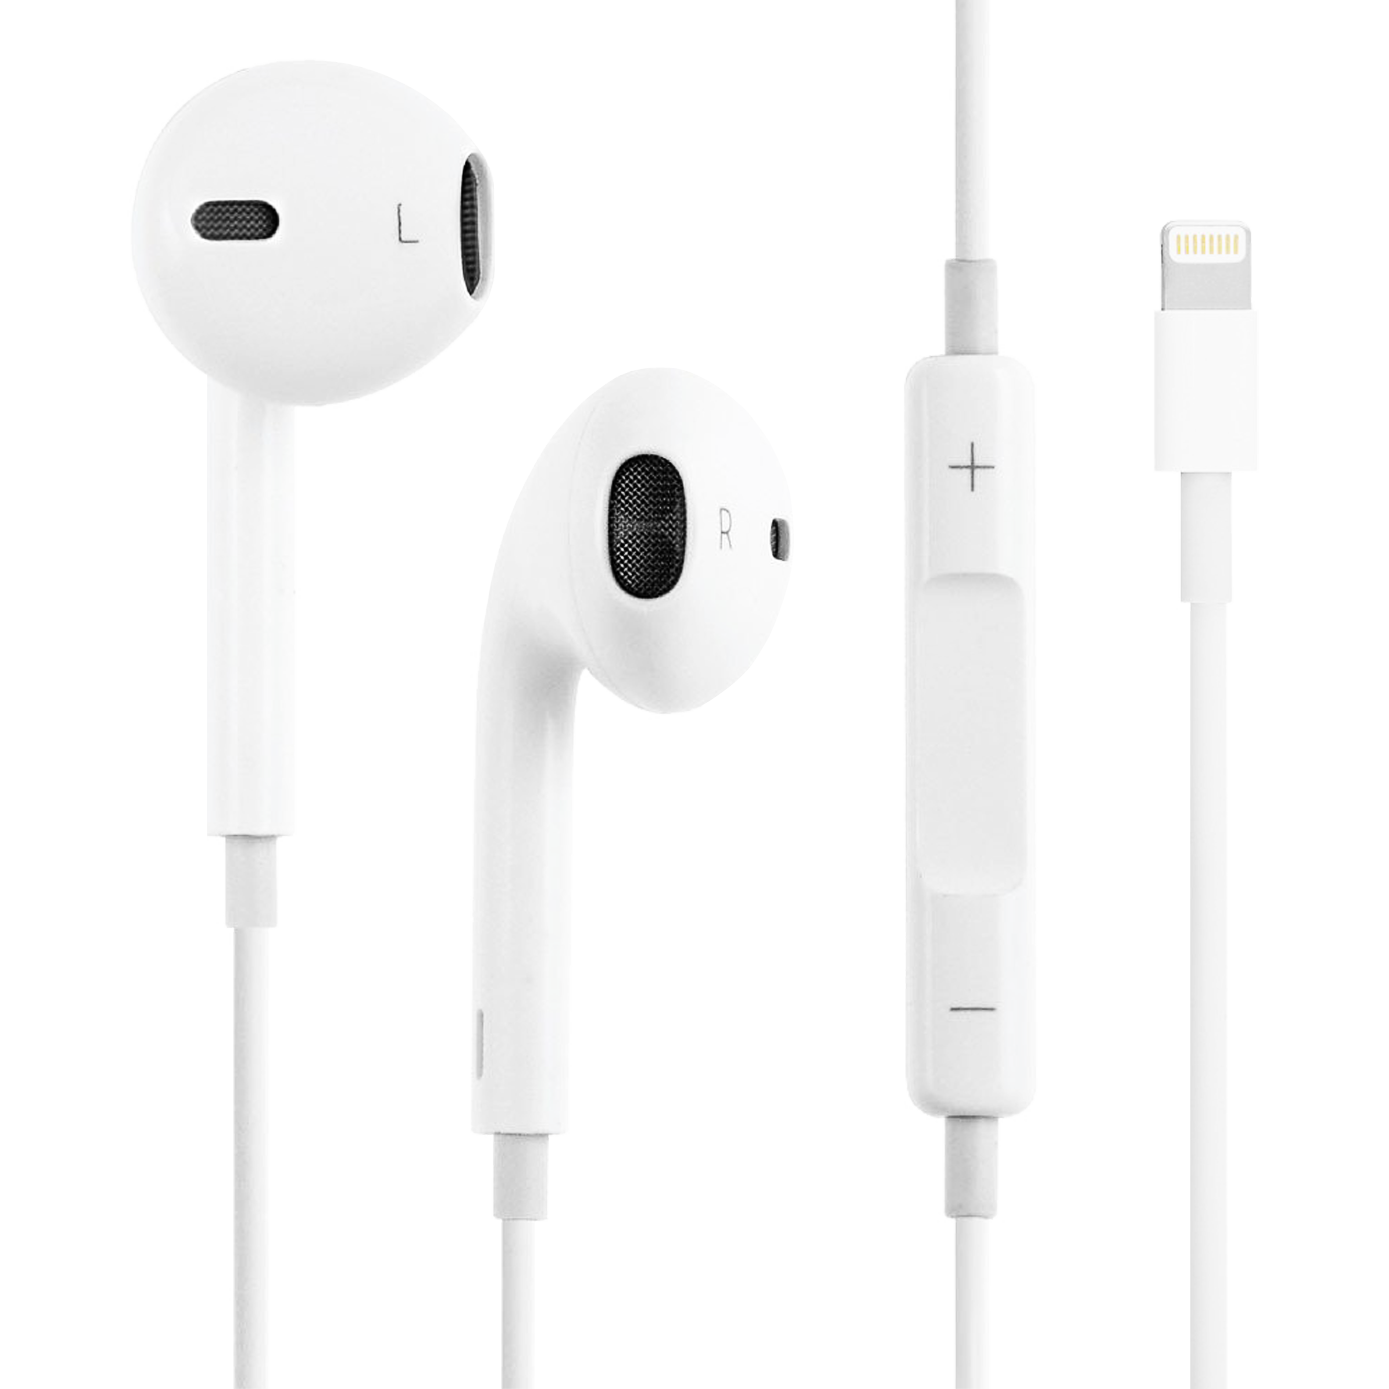 Apple AirPods 3rd Gen with Lightning Charging Case - White - Vodafone